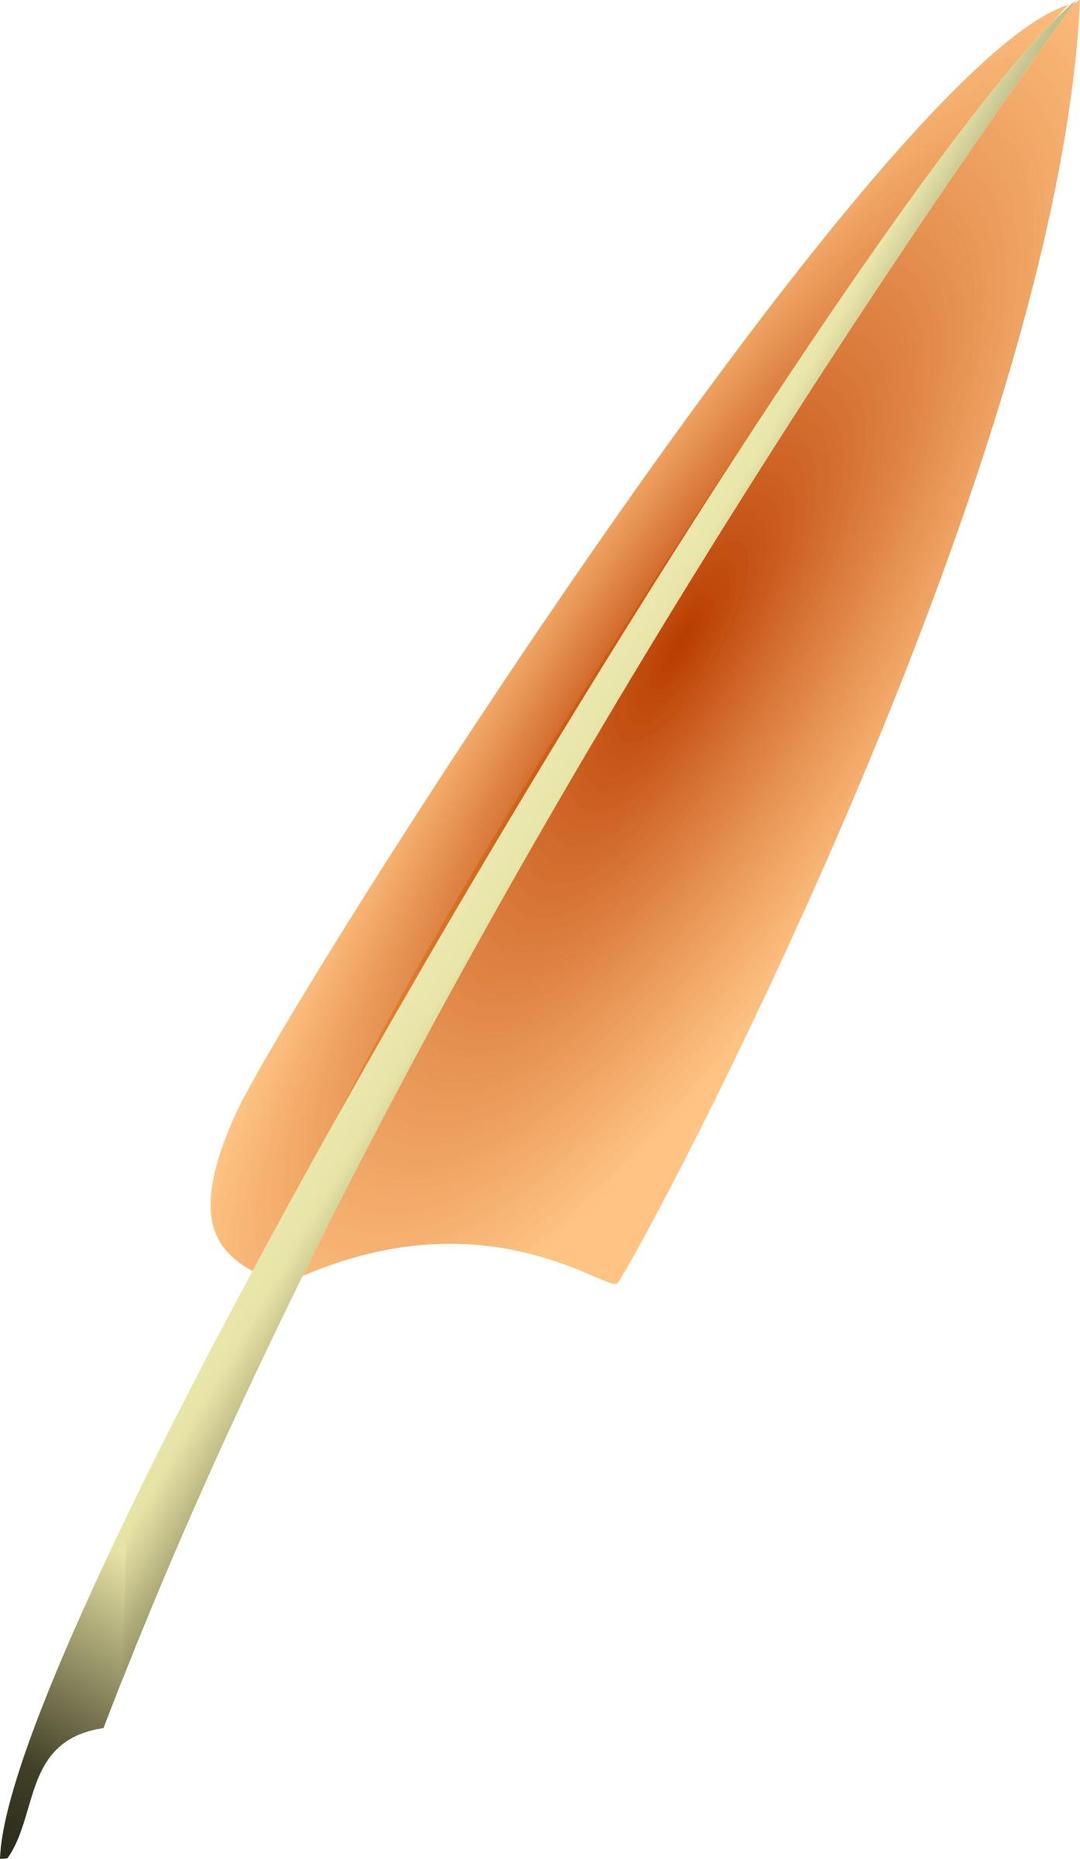 Used Quill png transparent